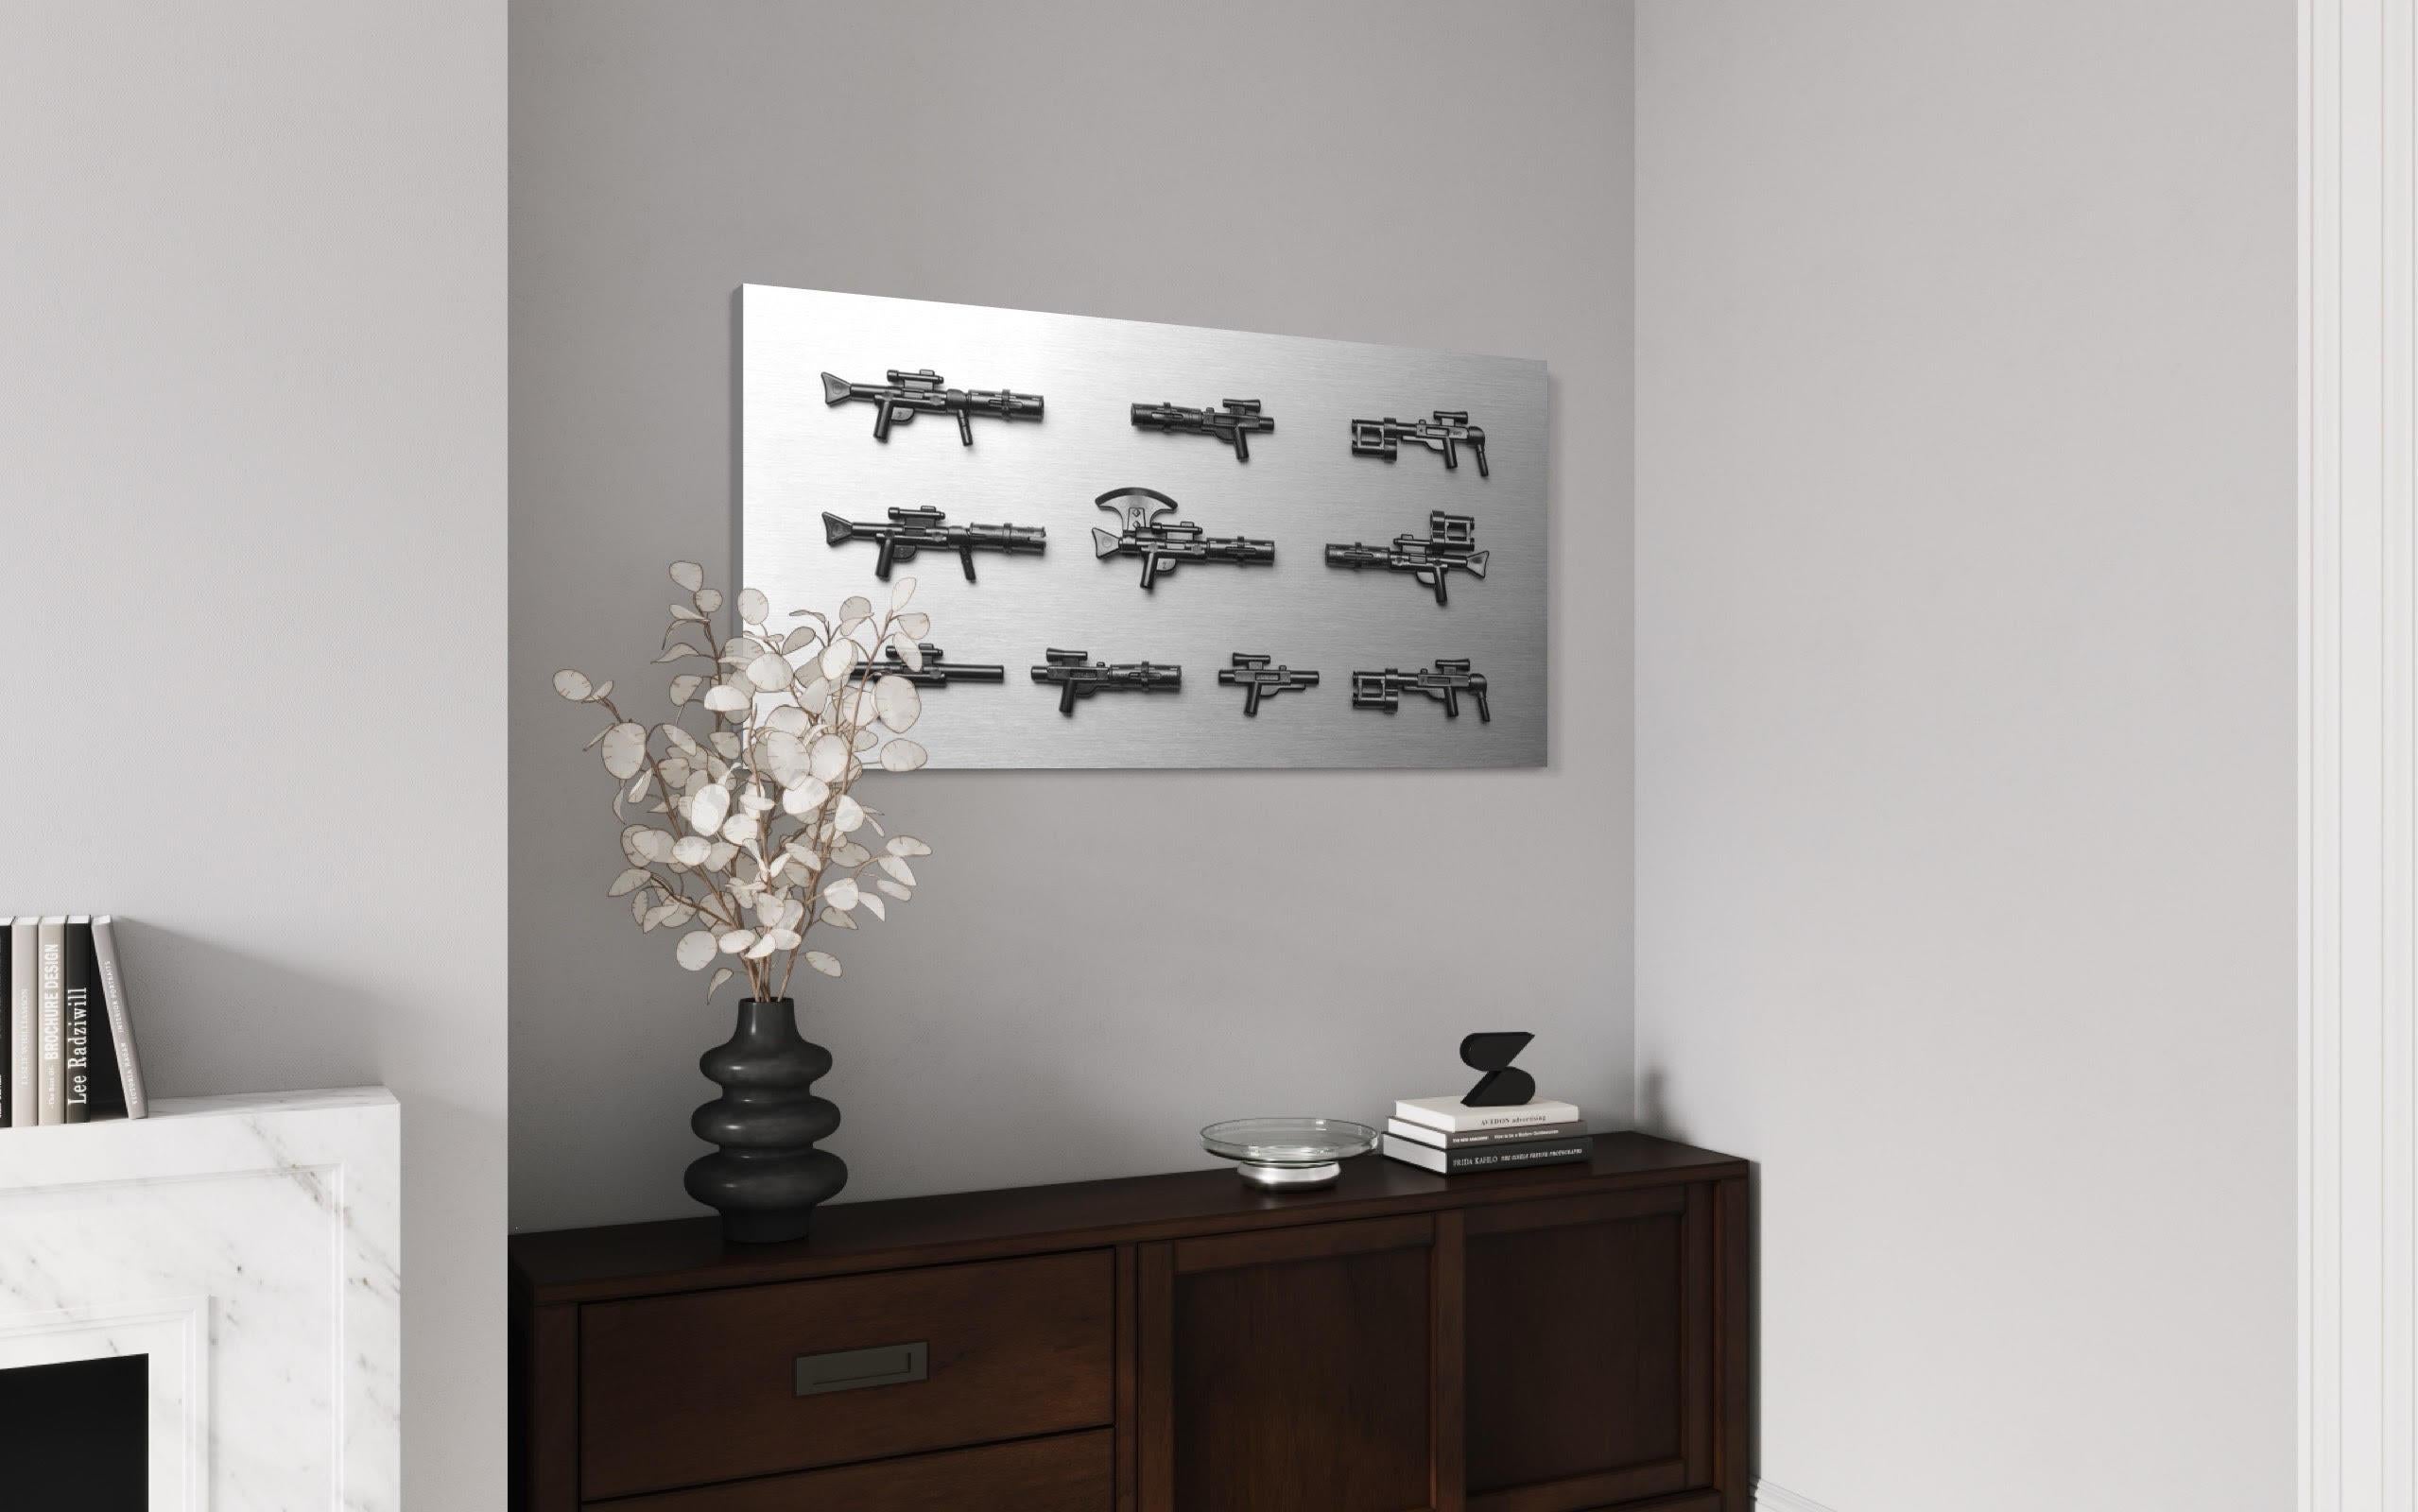 Armory / Multimedia Print of Guns / Edition 18 of 18  - Contemporary Mixed Media Art by Dale May